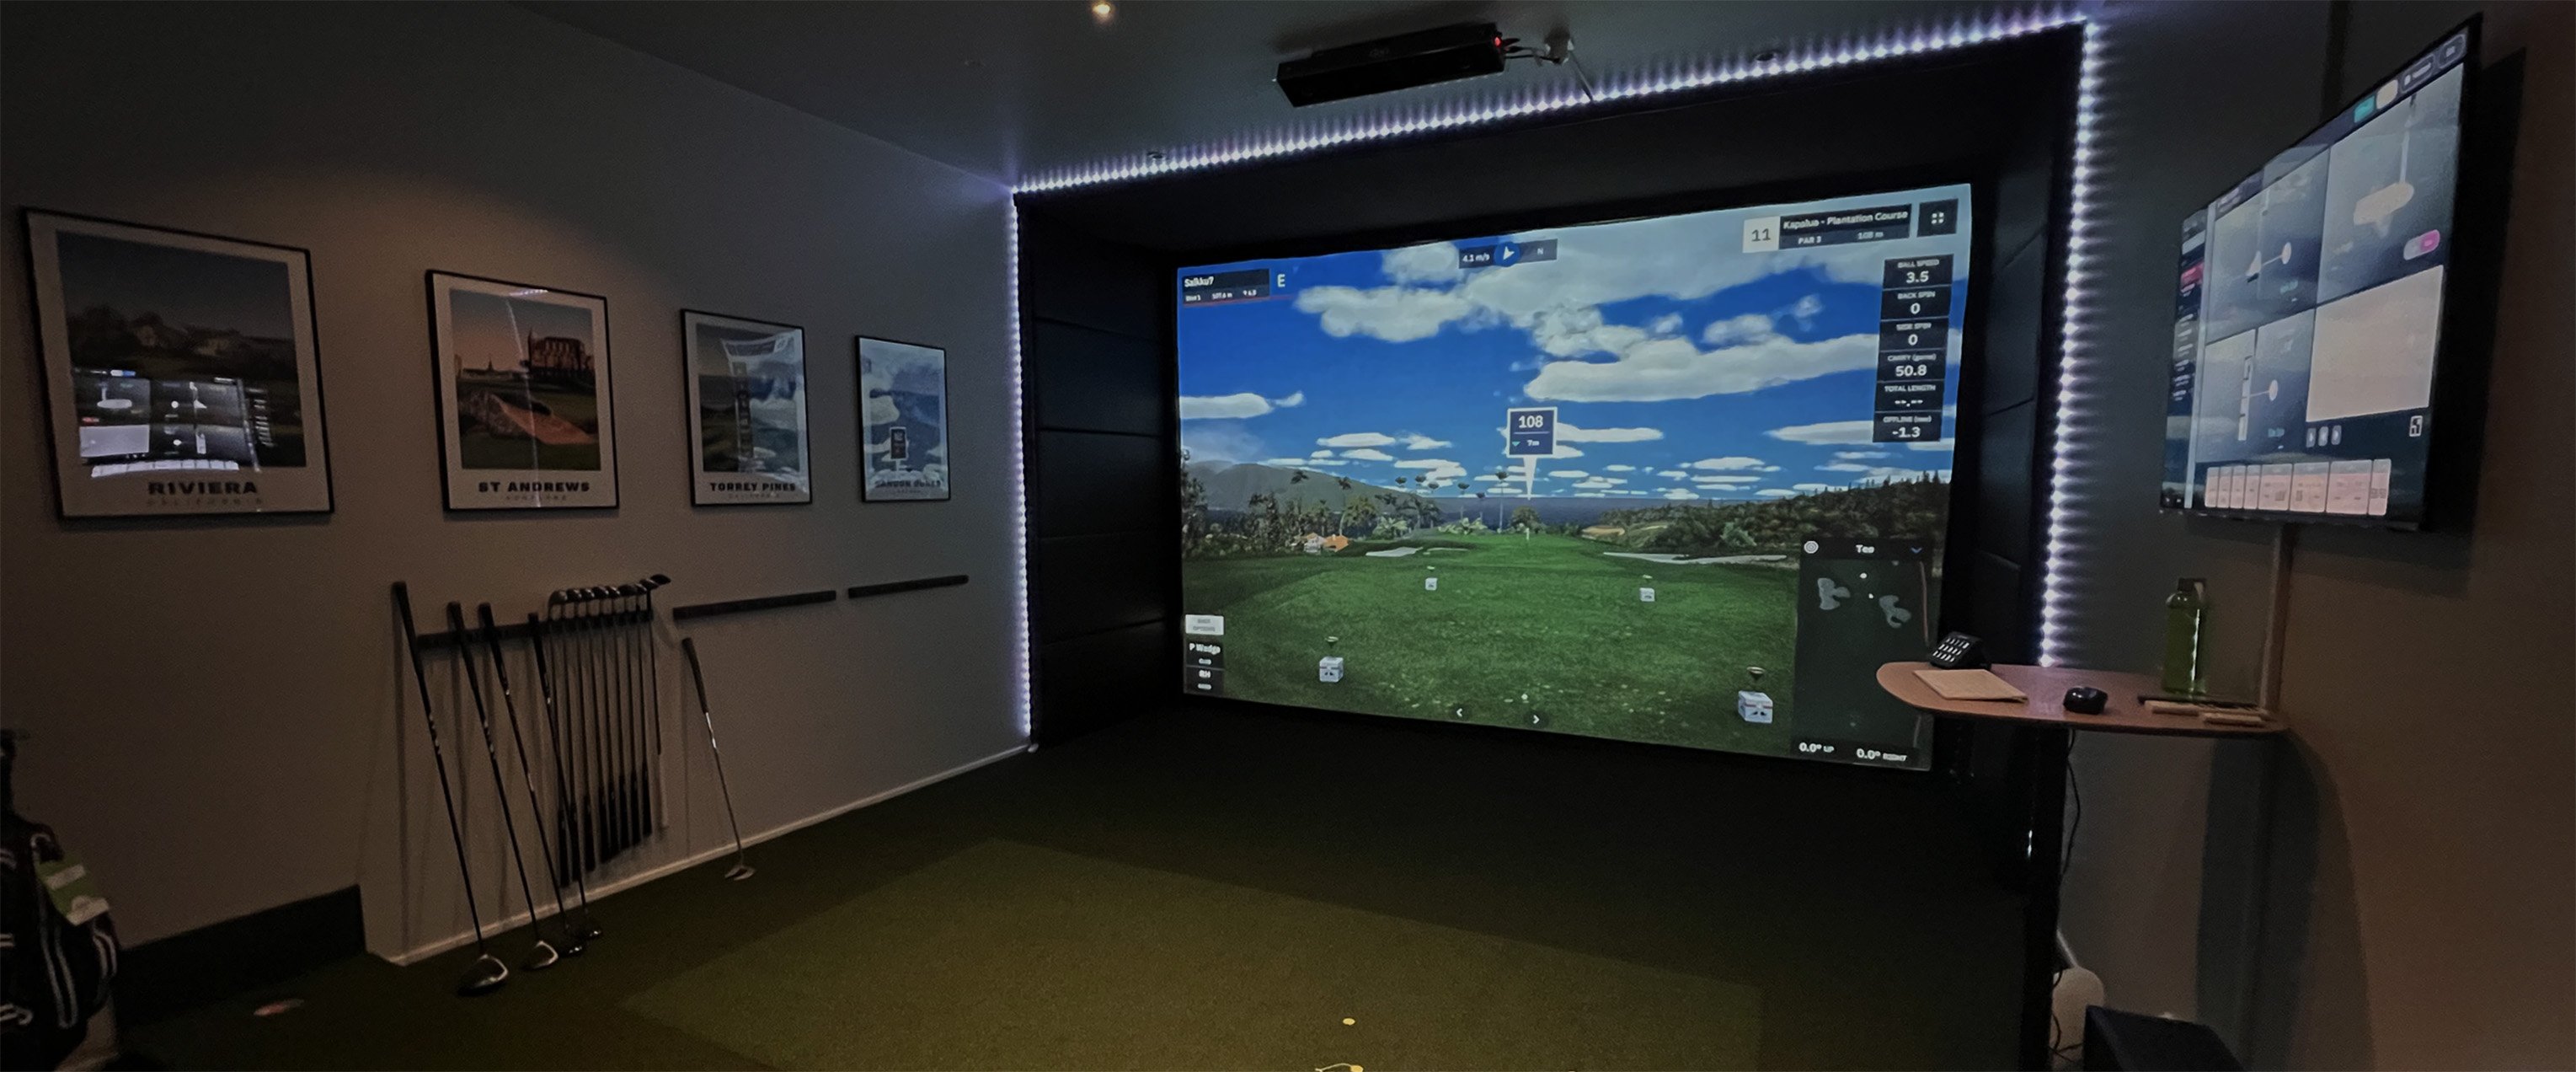 share-with-us-golf-room-mikko-wide